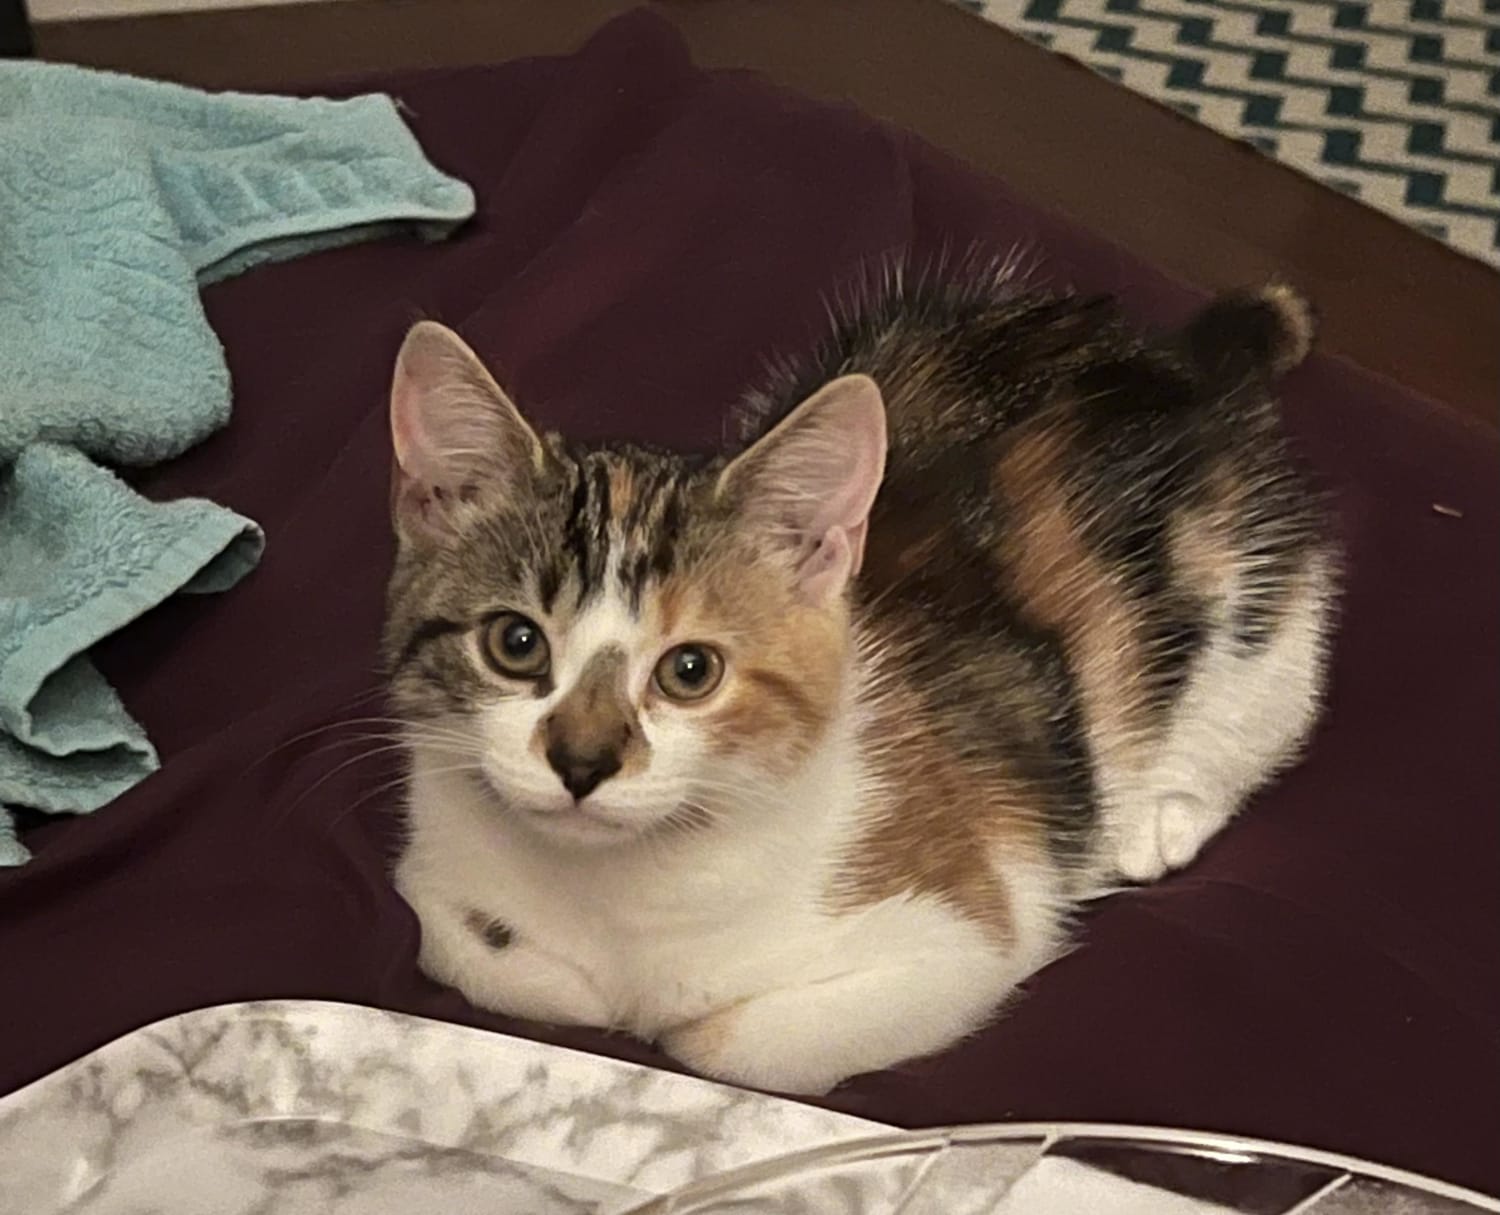 rate my 10 week old baby calico hazel's loafing skills :}